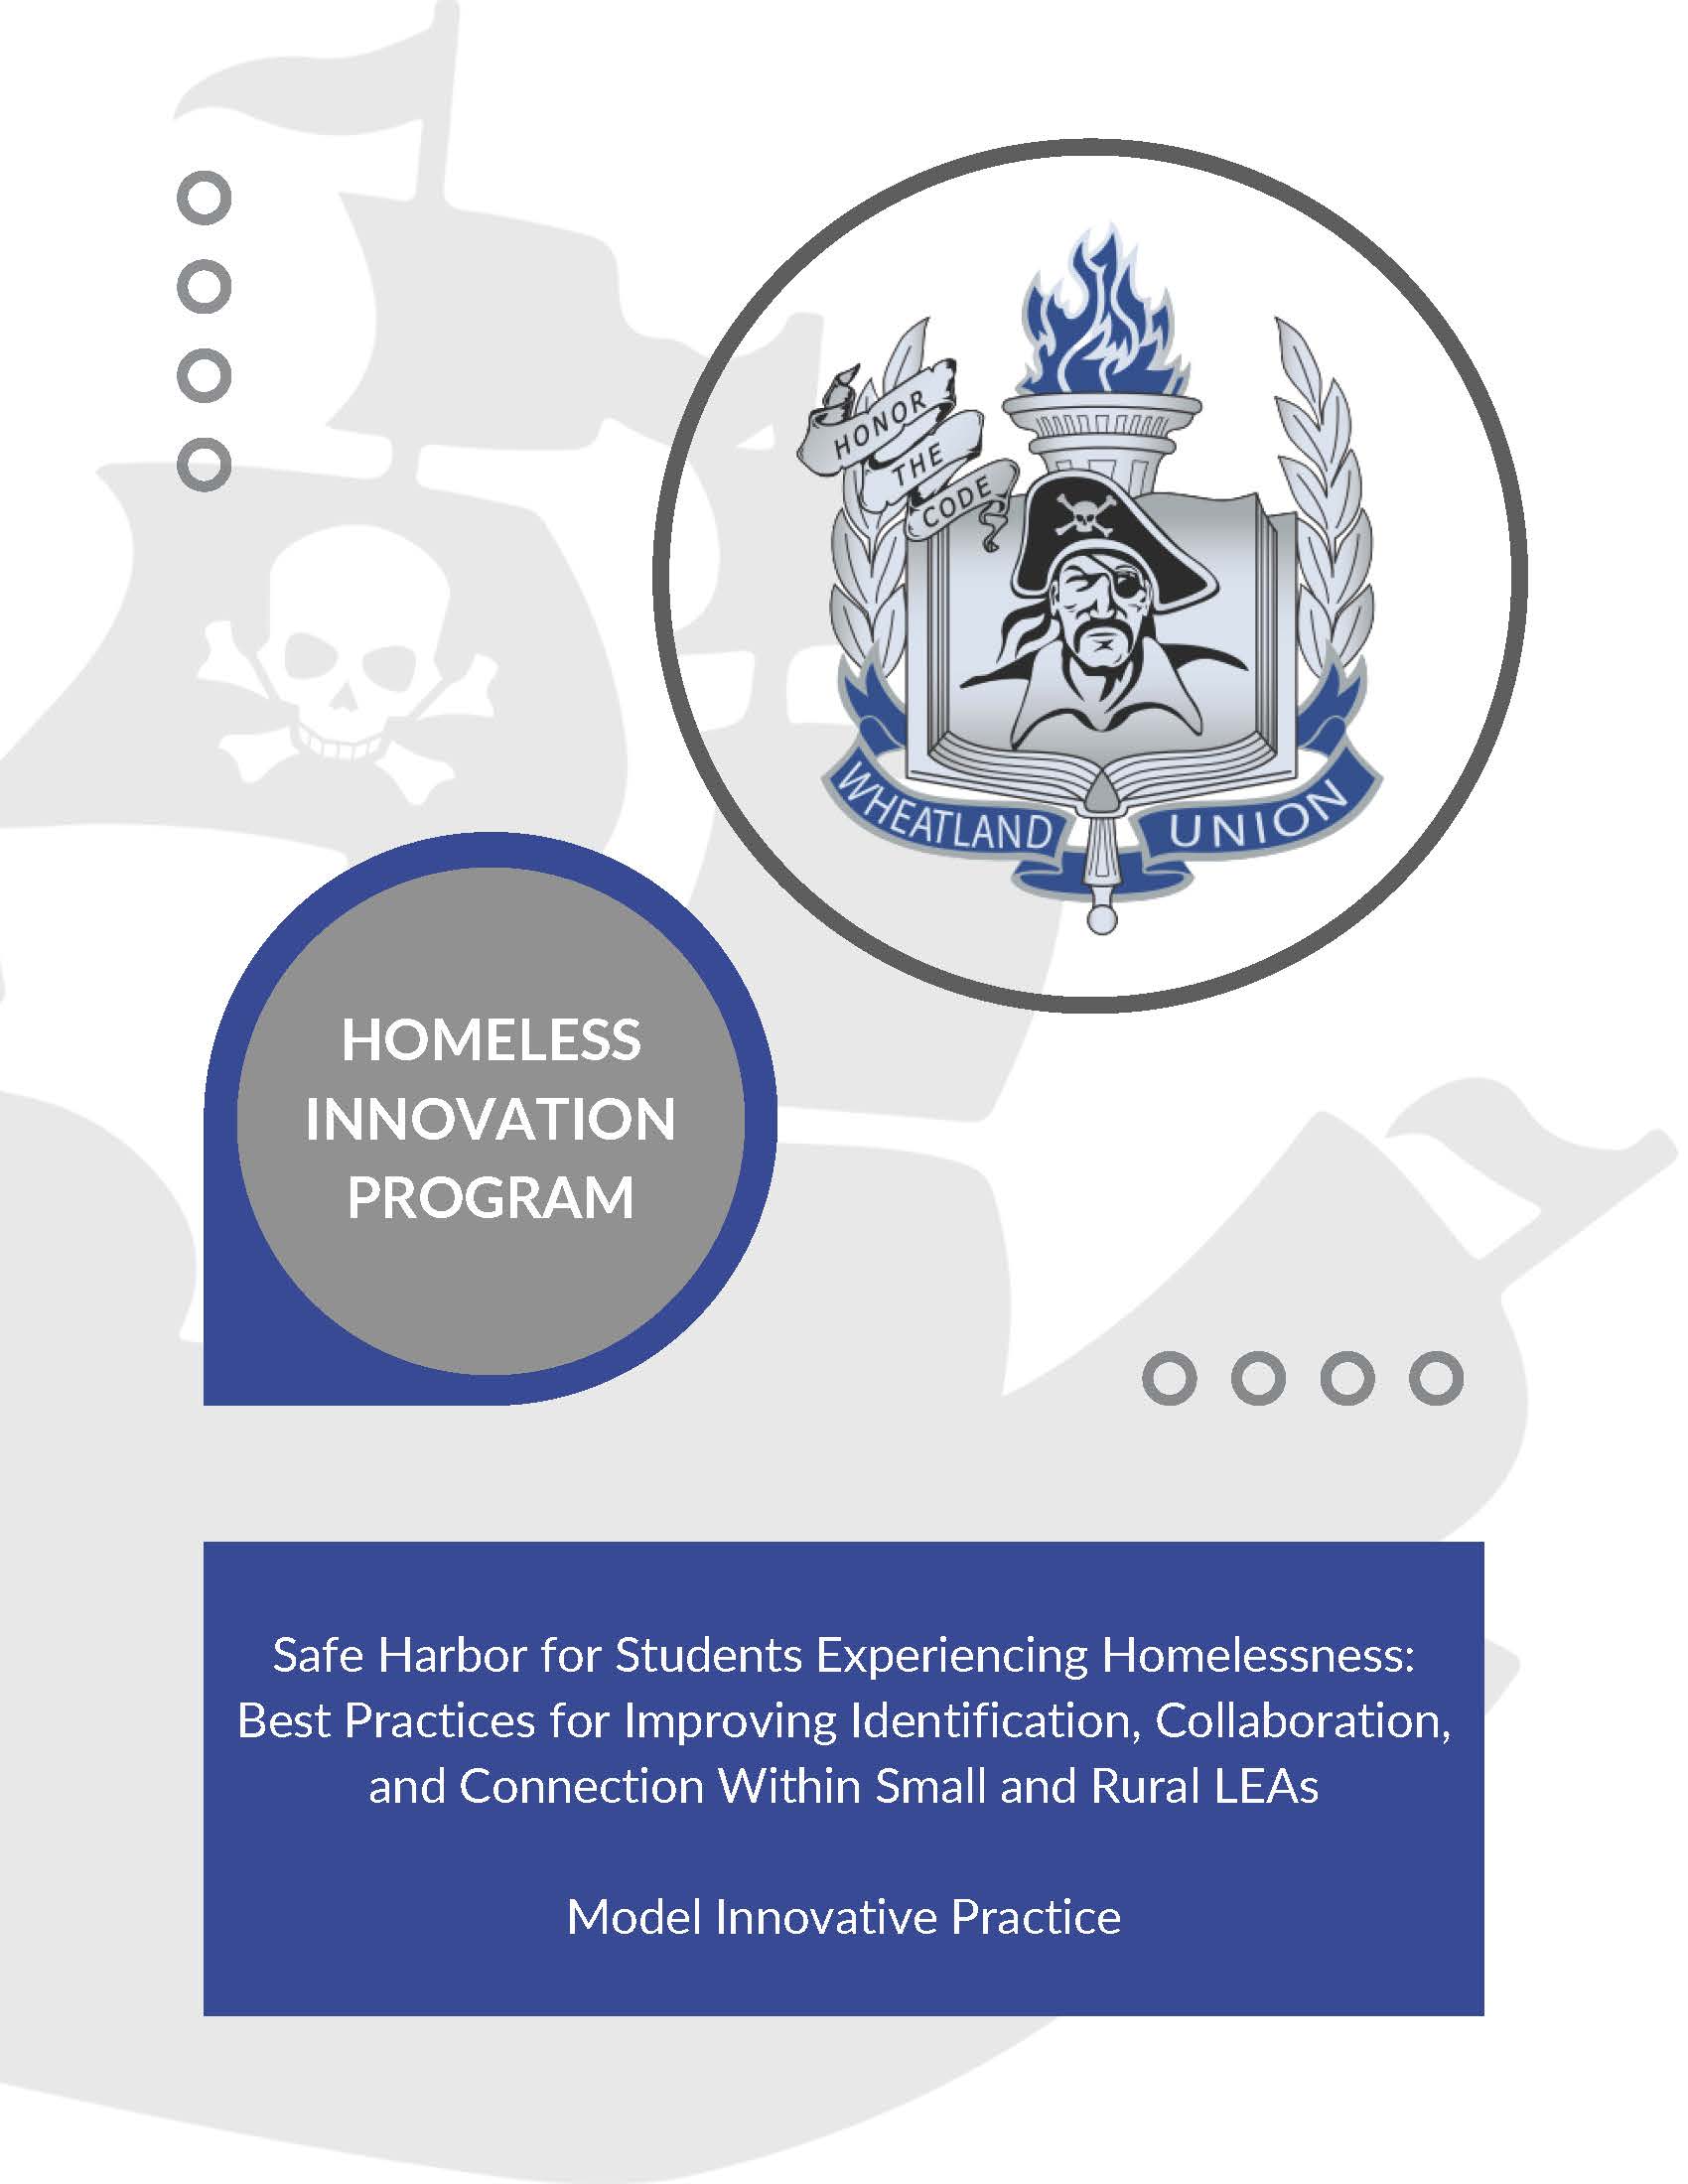 Safe Harbor, for students experiencing homelessness toolkit